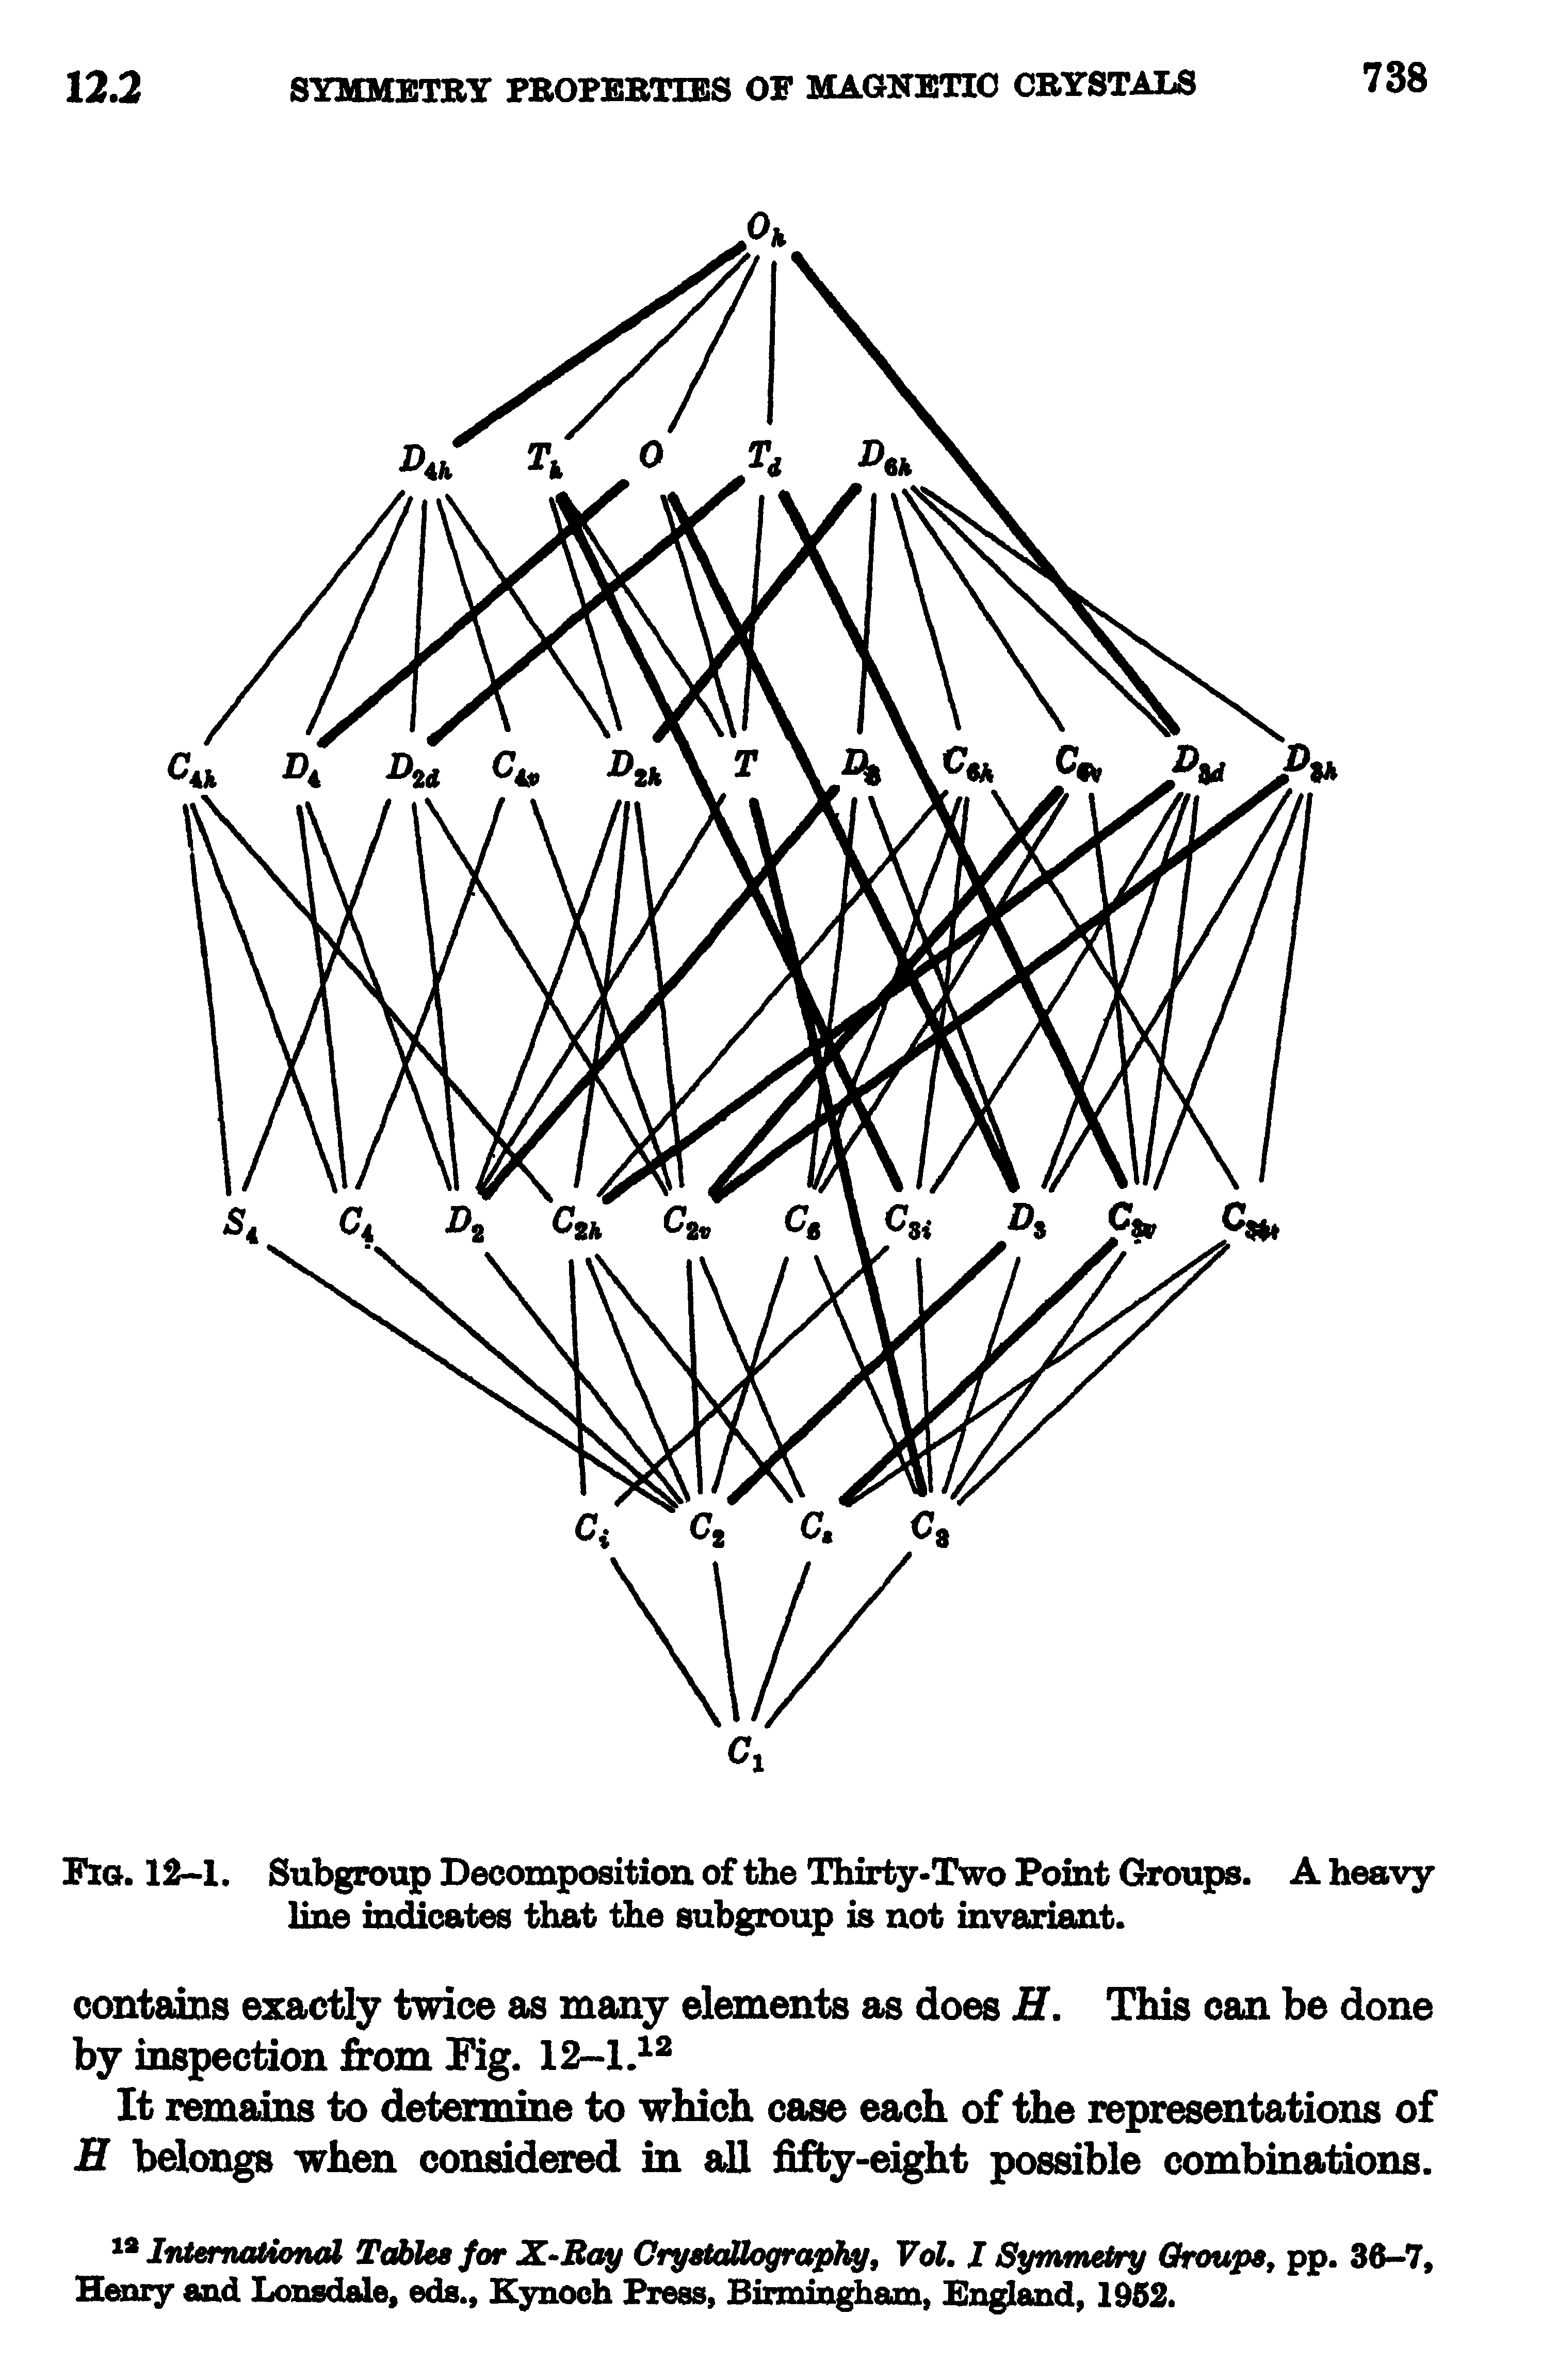 Fig. 12-1. Subgroup Decomposition of the Thirty-Two Point Groups. A heavy line indicates that the subgroup is not invariant.